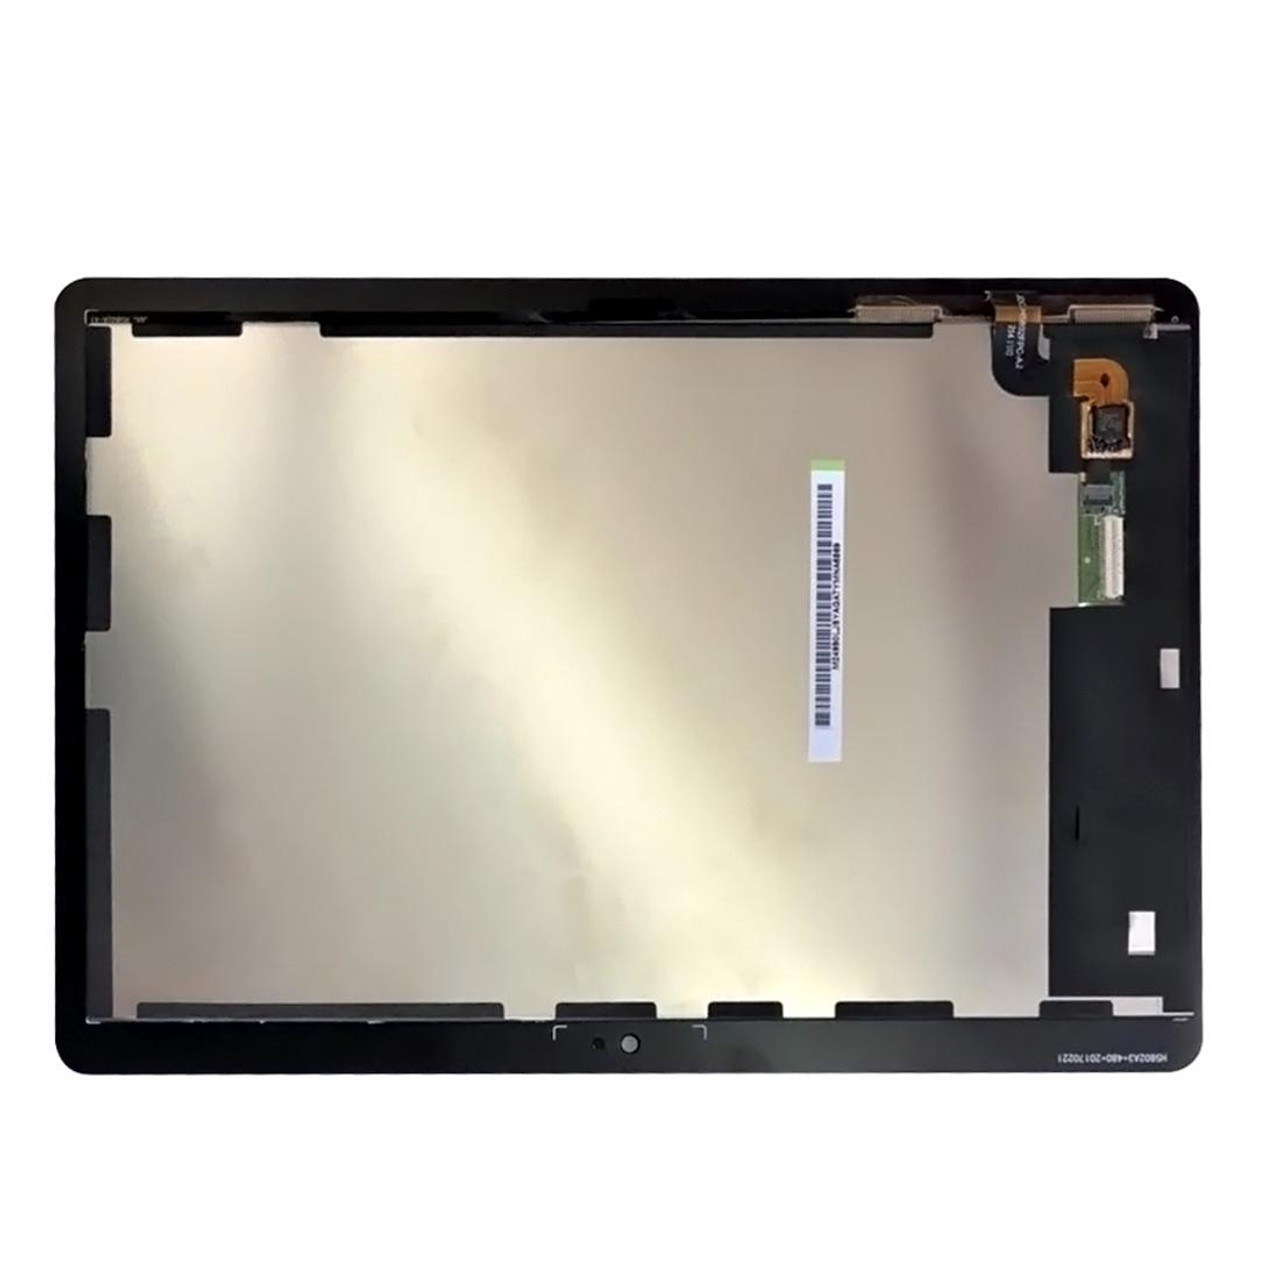 LCD + touch screen black replacement for Huawei MediaPad T3 10